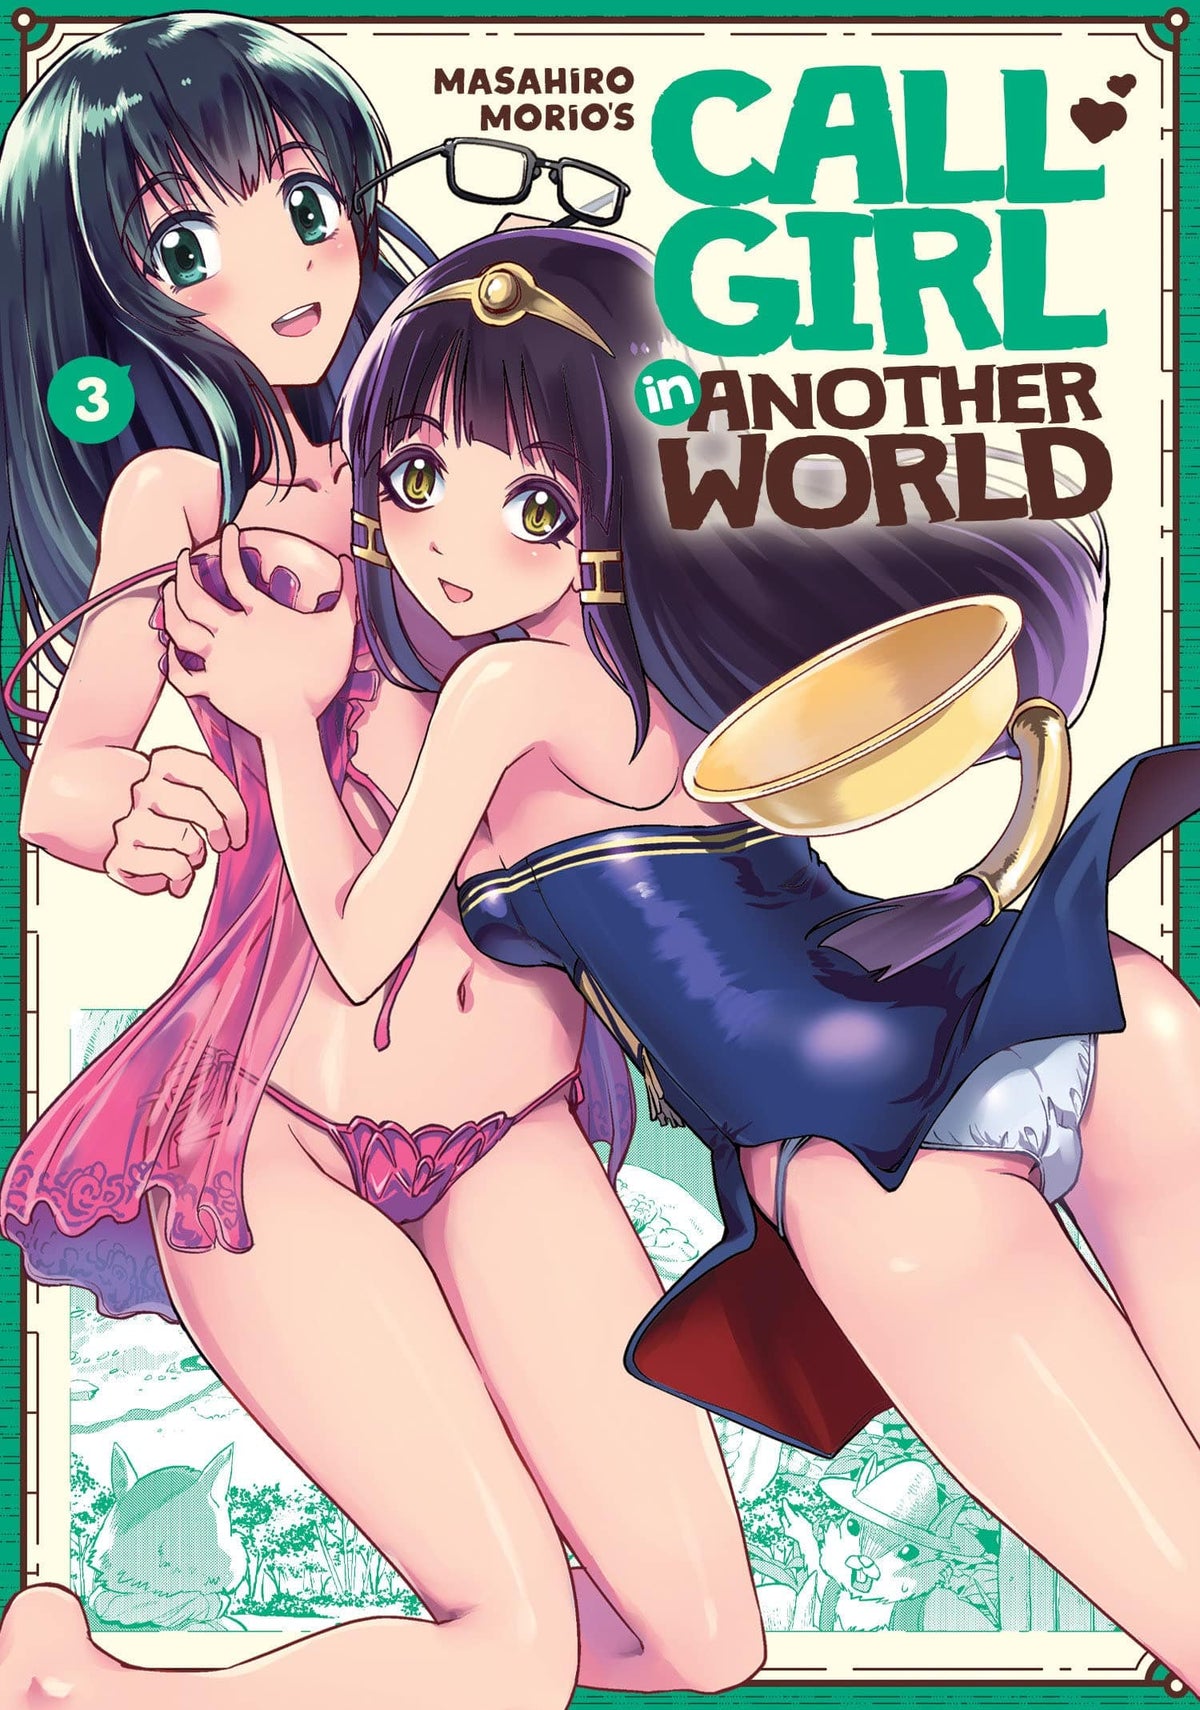 Call Girl in a Another World Vol. 3 - Third Eye